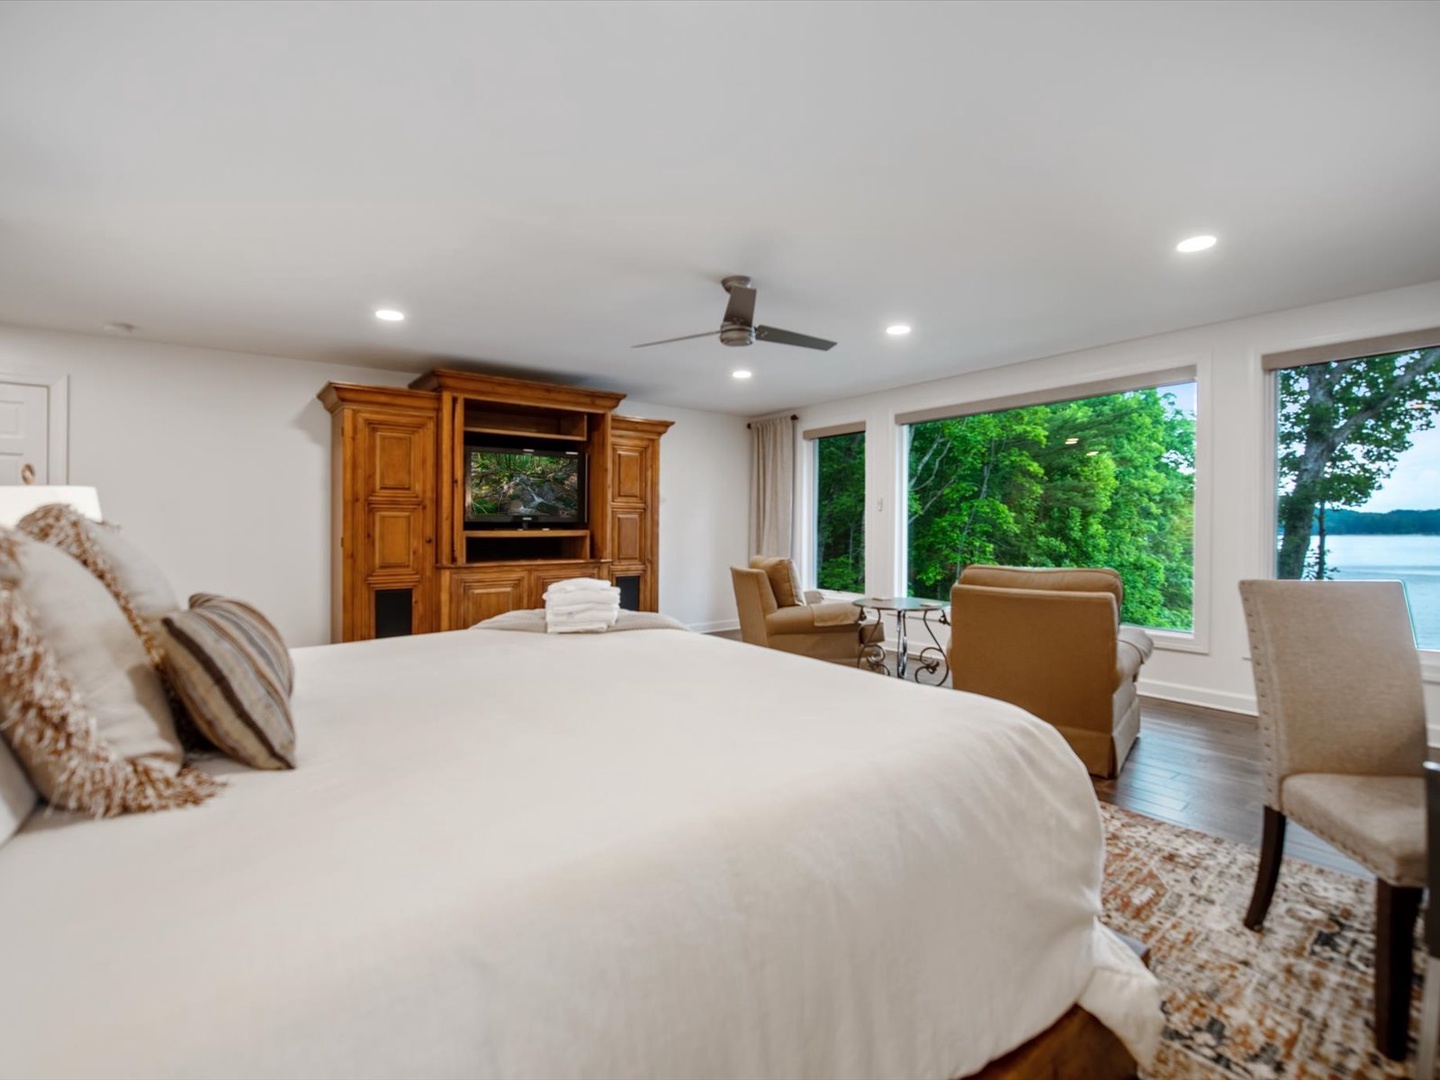 Gleesome Inn- Master bedroom with an entertainment center and TV overlooking the lake